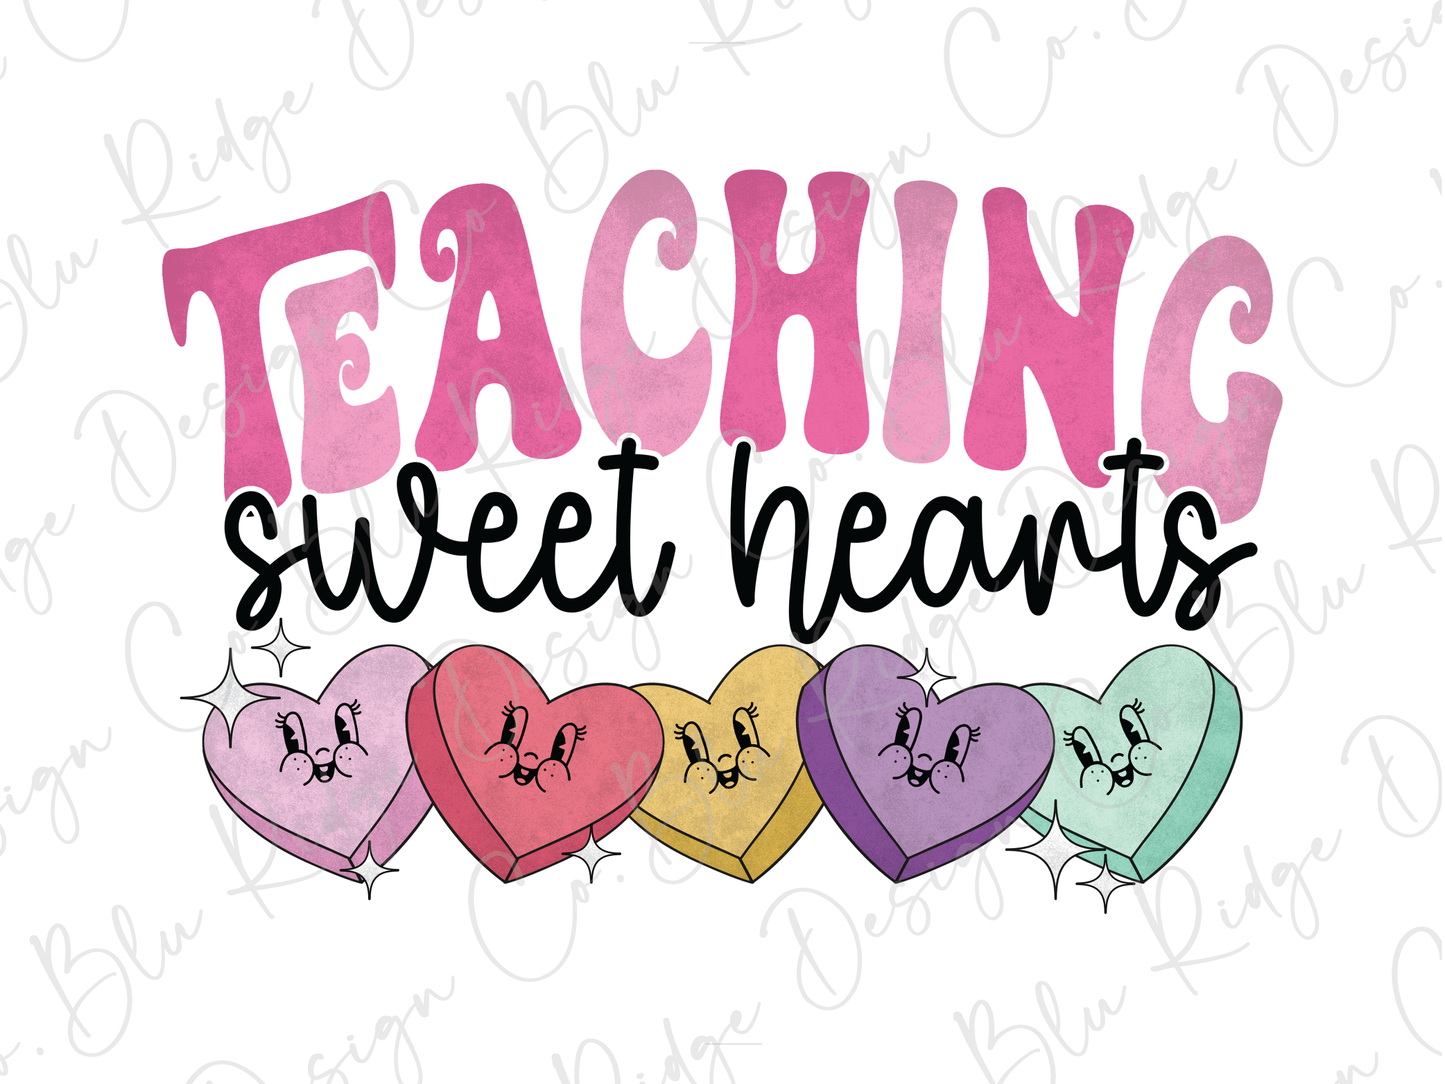 a drawing of hearts with the words teaching sweet hearts